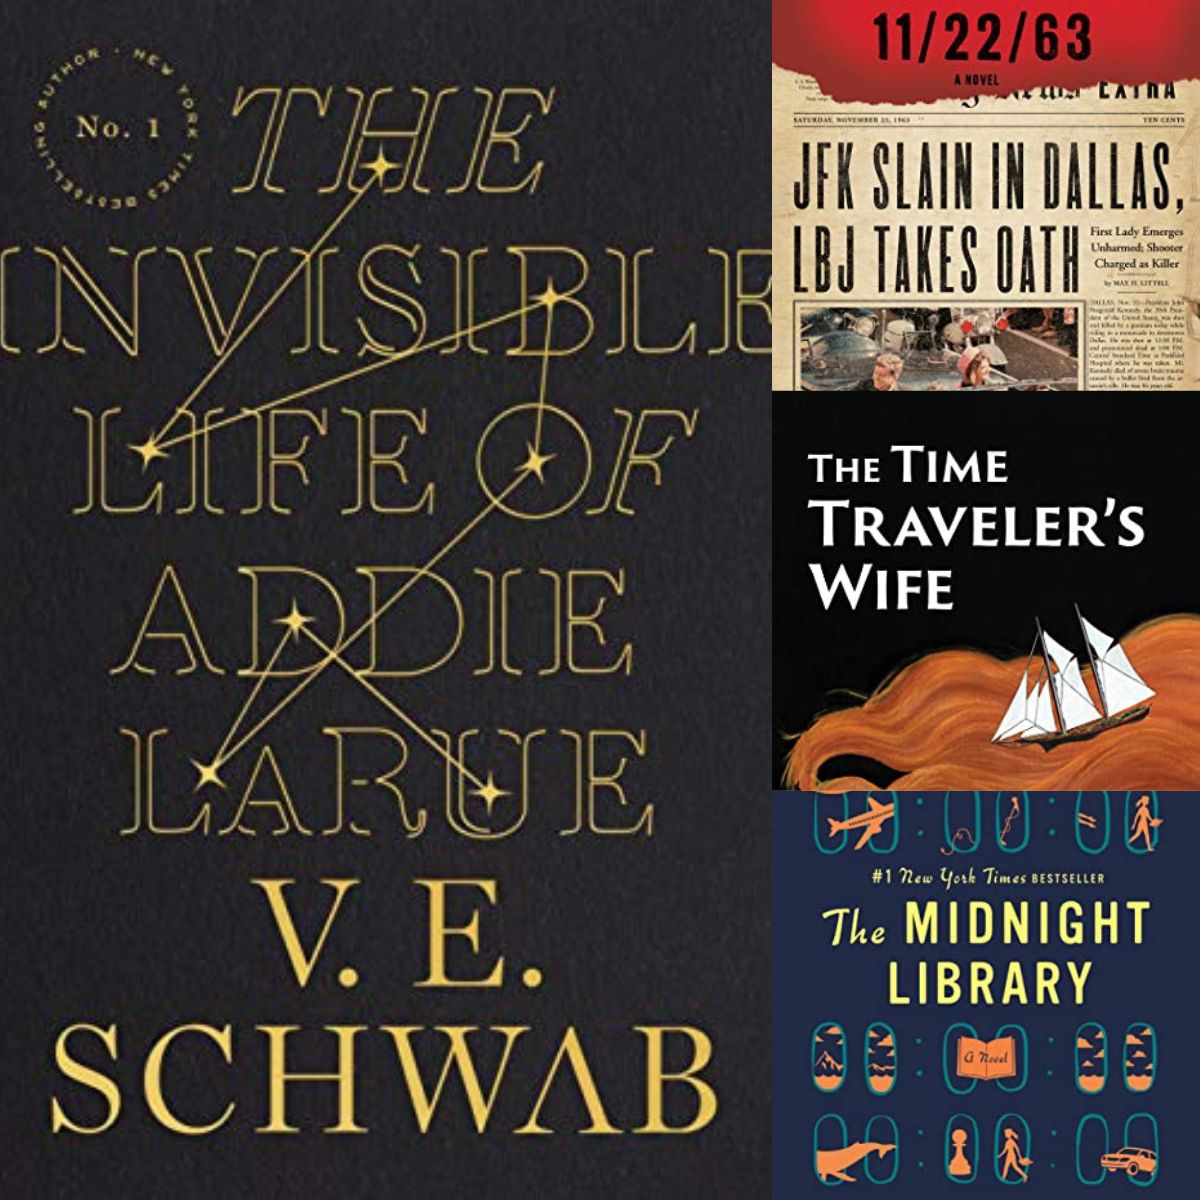 The 21 Best Books About Time Travel, From 'Outlander' to 'Kindred